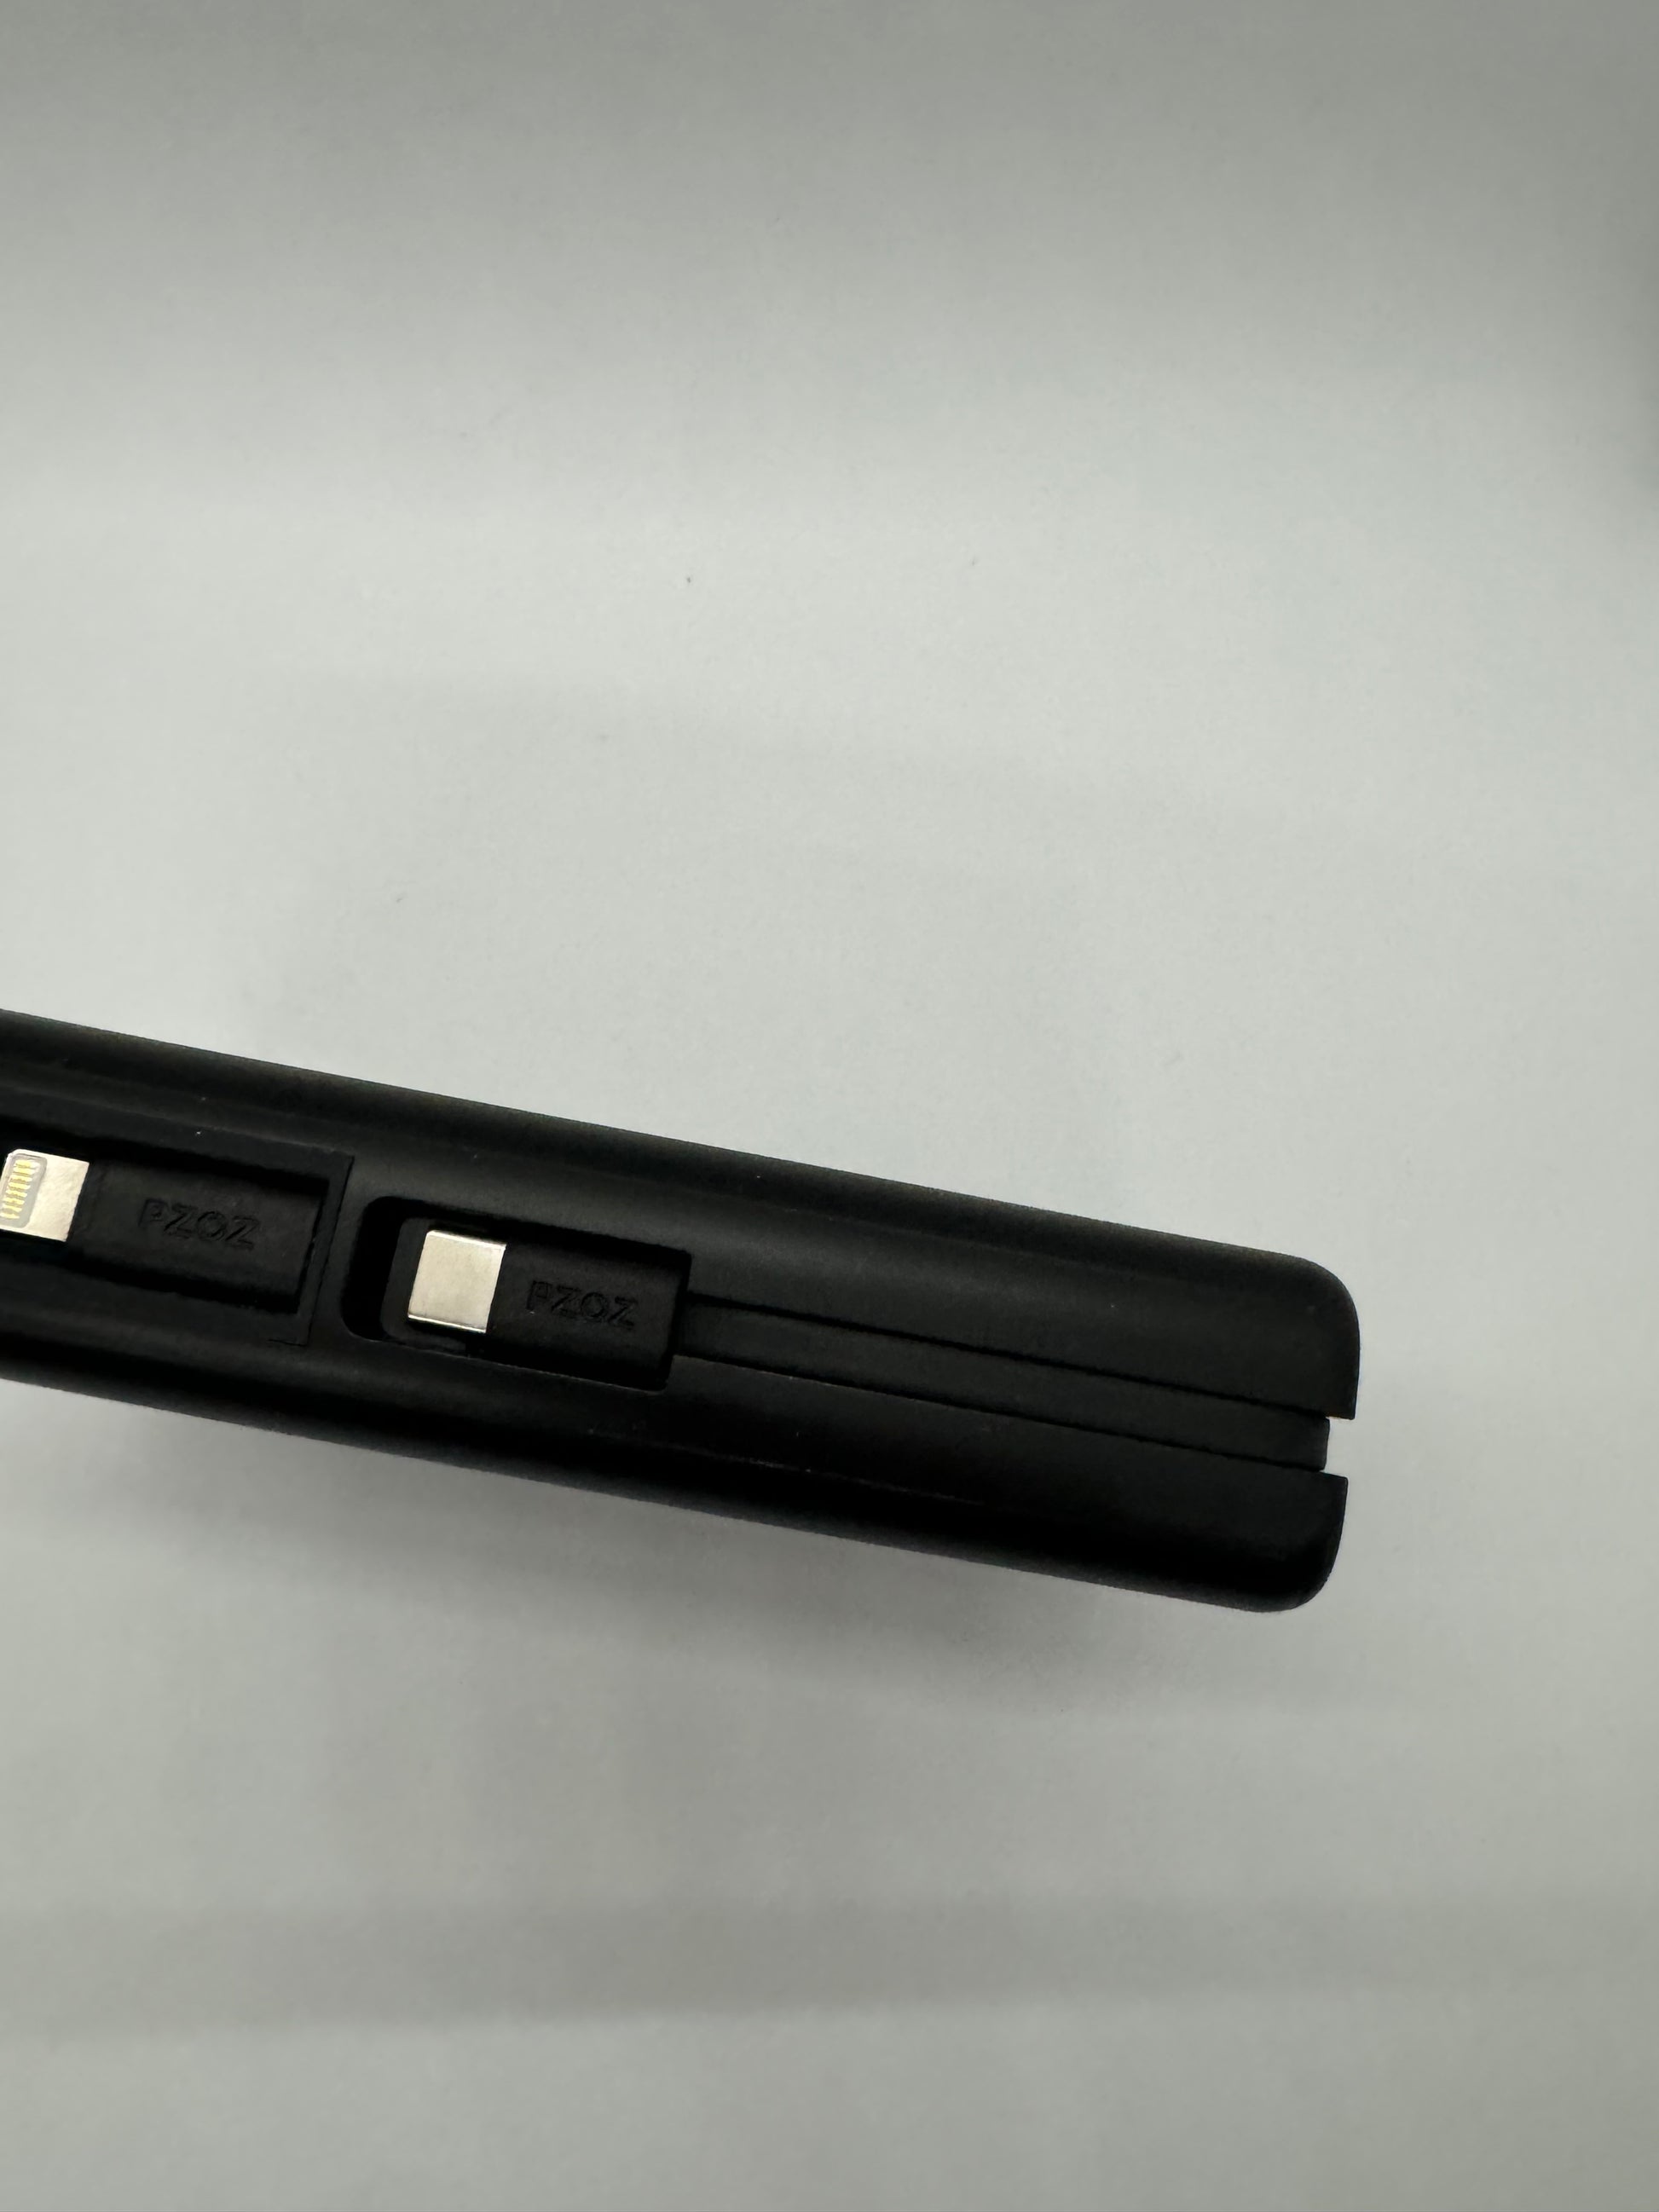 The picture shows a black object in the bottom right corner against a plain white background. The object appears to be a slim, rectangular device with rounded edges. It has two slots on the top side, each labeled "PZOZ". There is also a small, rectangular metallic connector protruding from the left side of the device. The device seems to be some sort of electronic accessory, possibly a charging or connection cable.